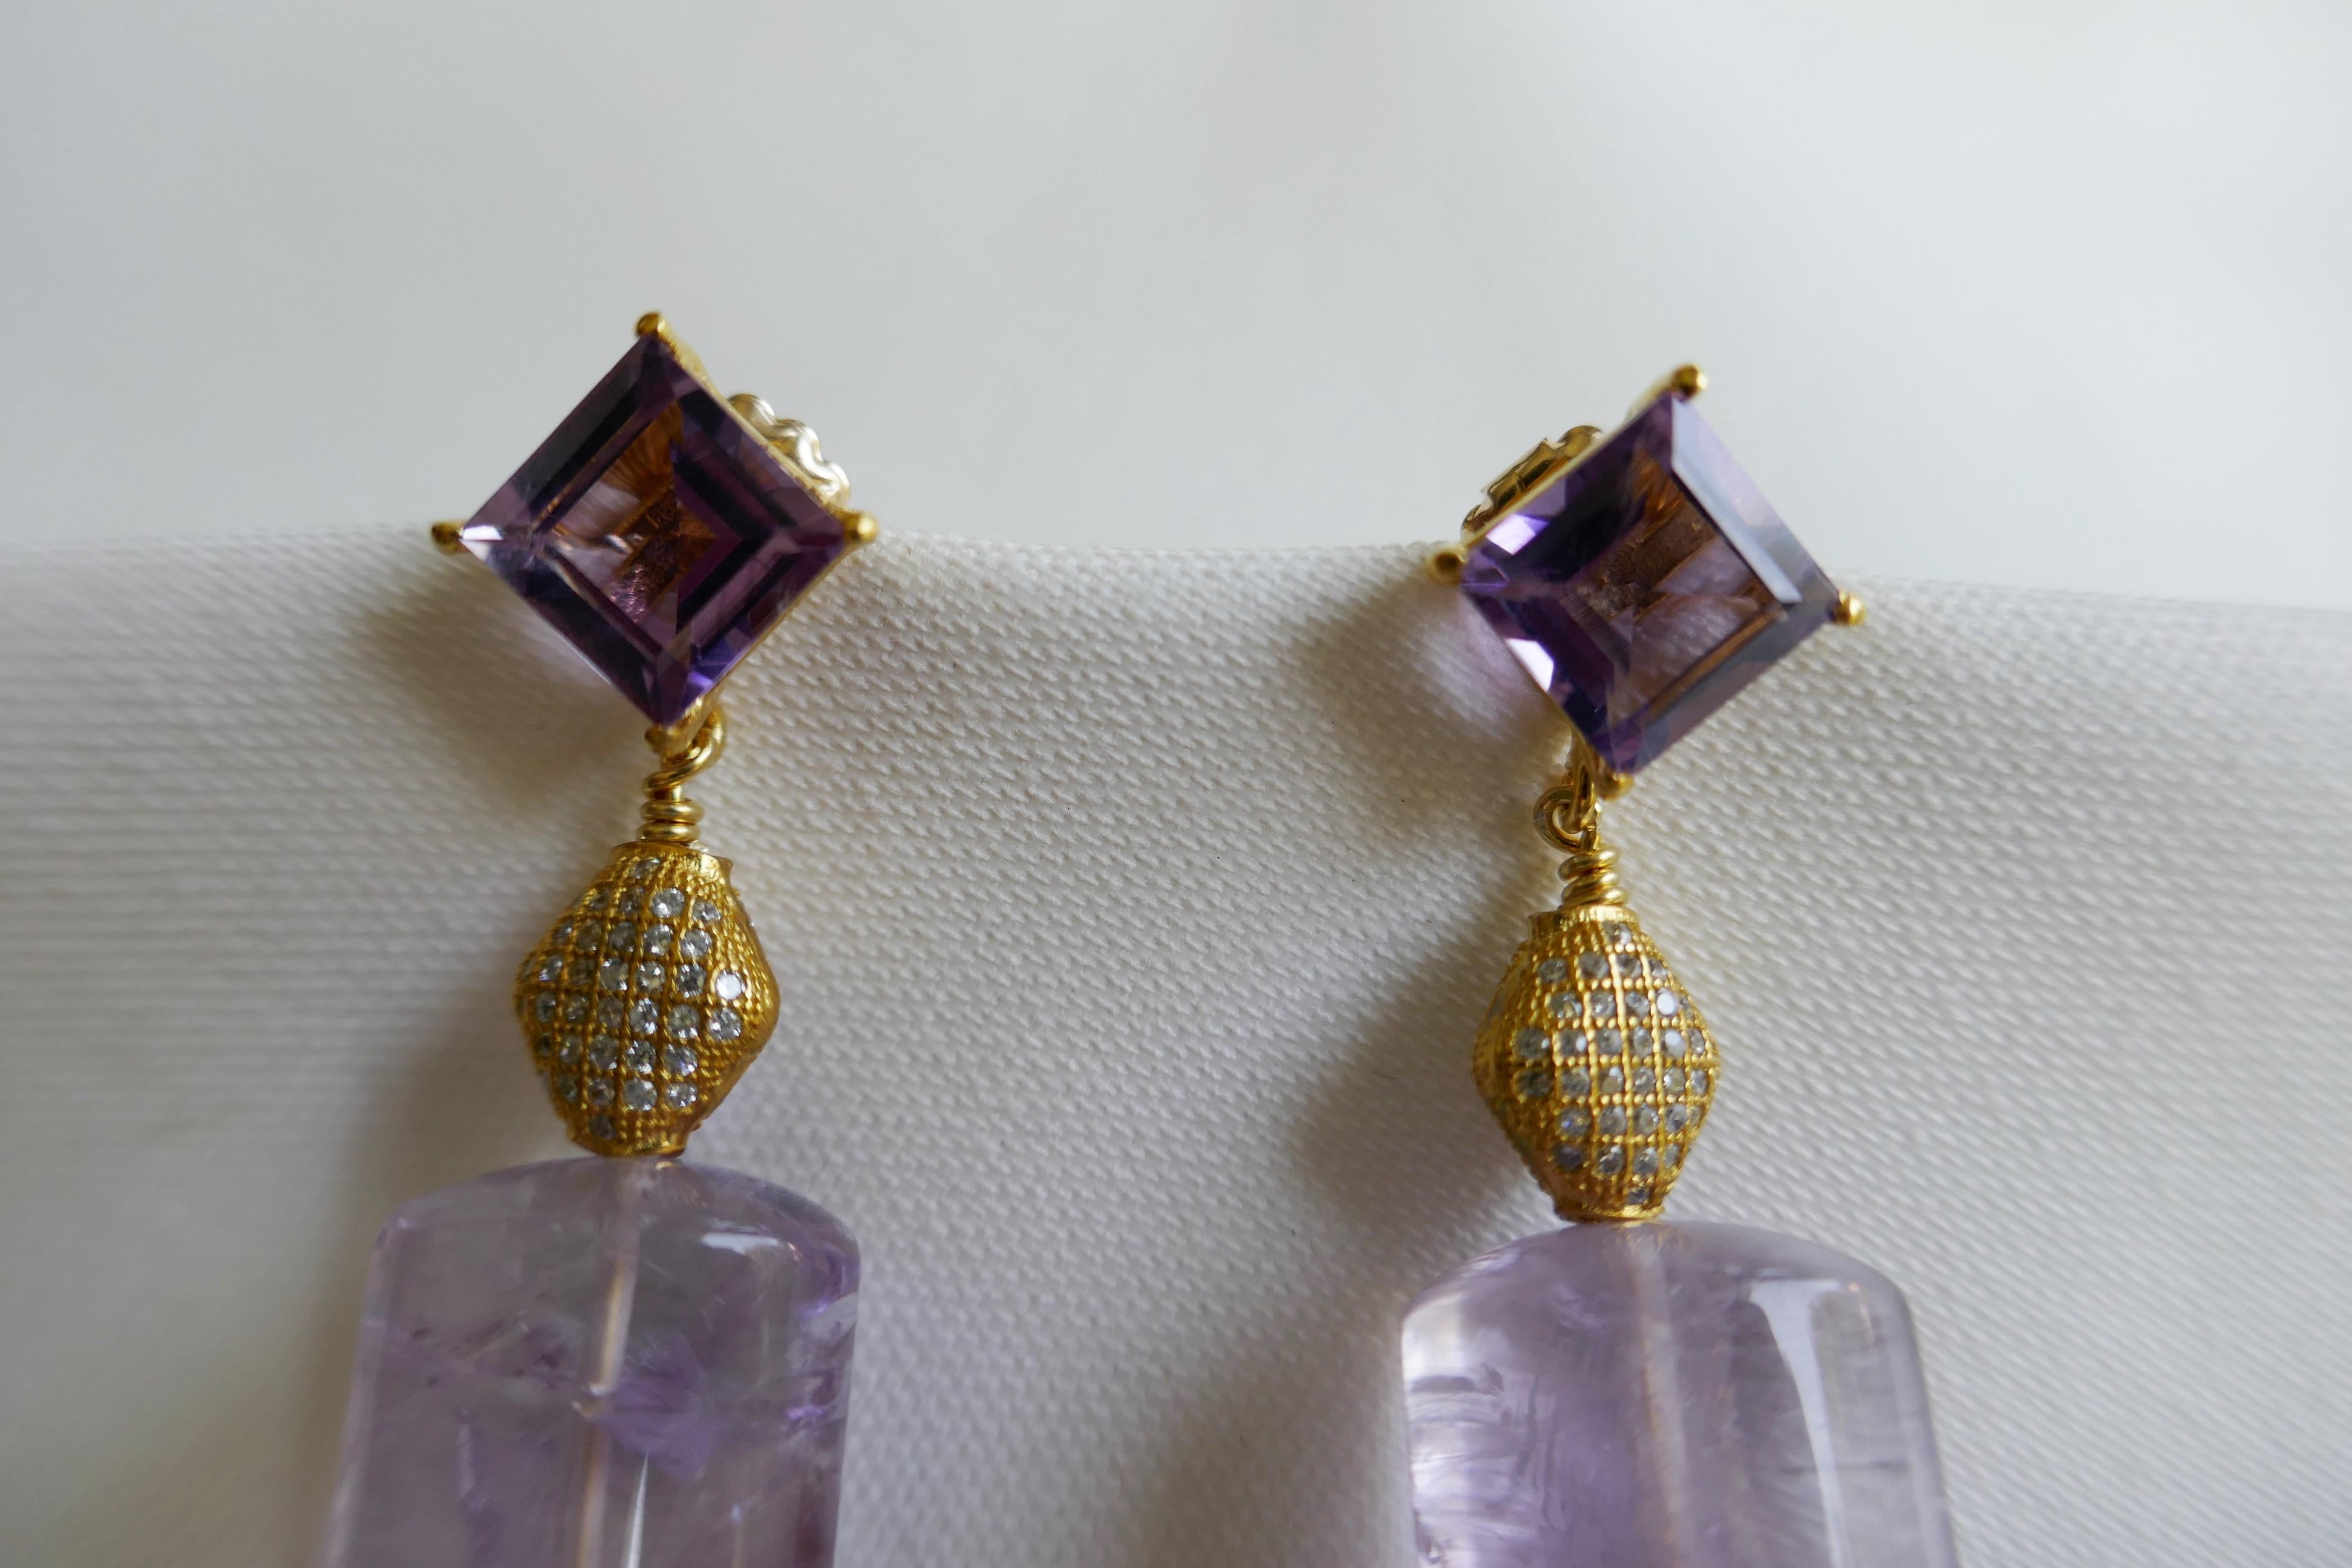 These amethyst earrings are stunning. The earrings post are 10mm x 10mm amethyst on 14k plated 925 sterling silver, vermeil 925 Cubic zirconia bead and amethyst. The large back are gold filled. The earrings are 1 7/8 inches long.  Designed and